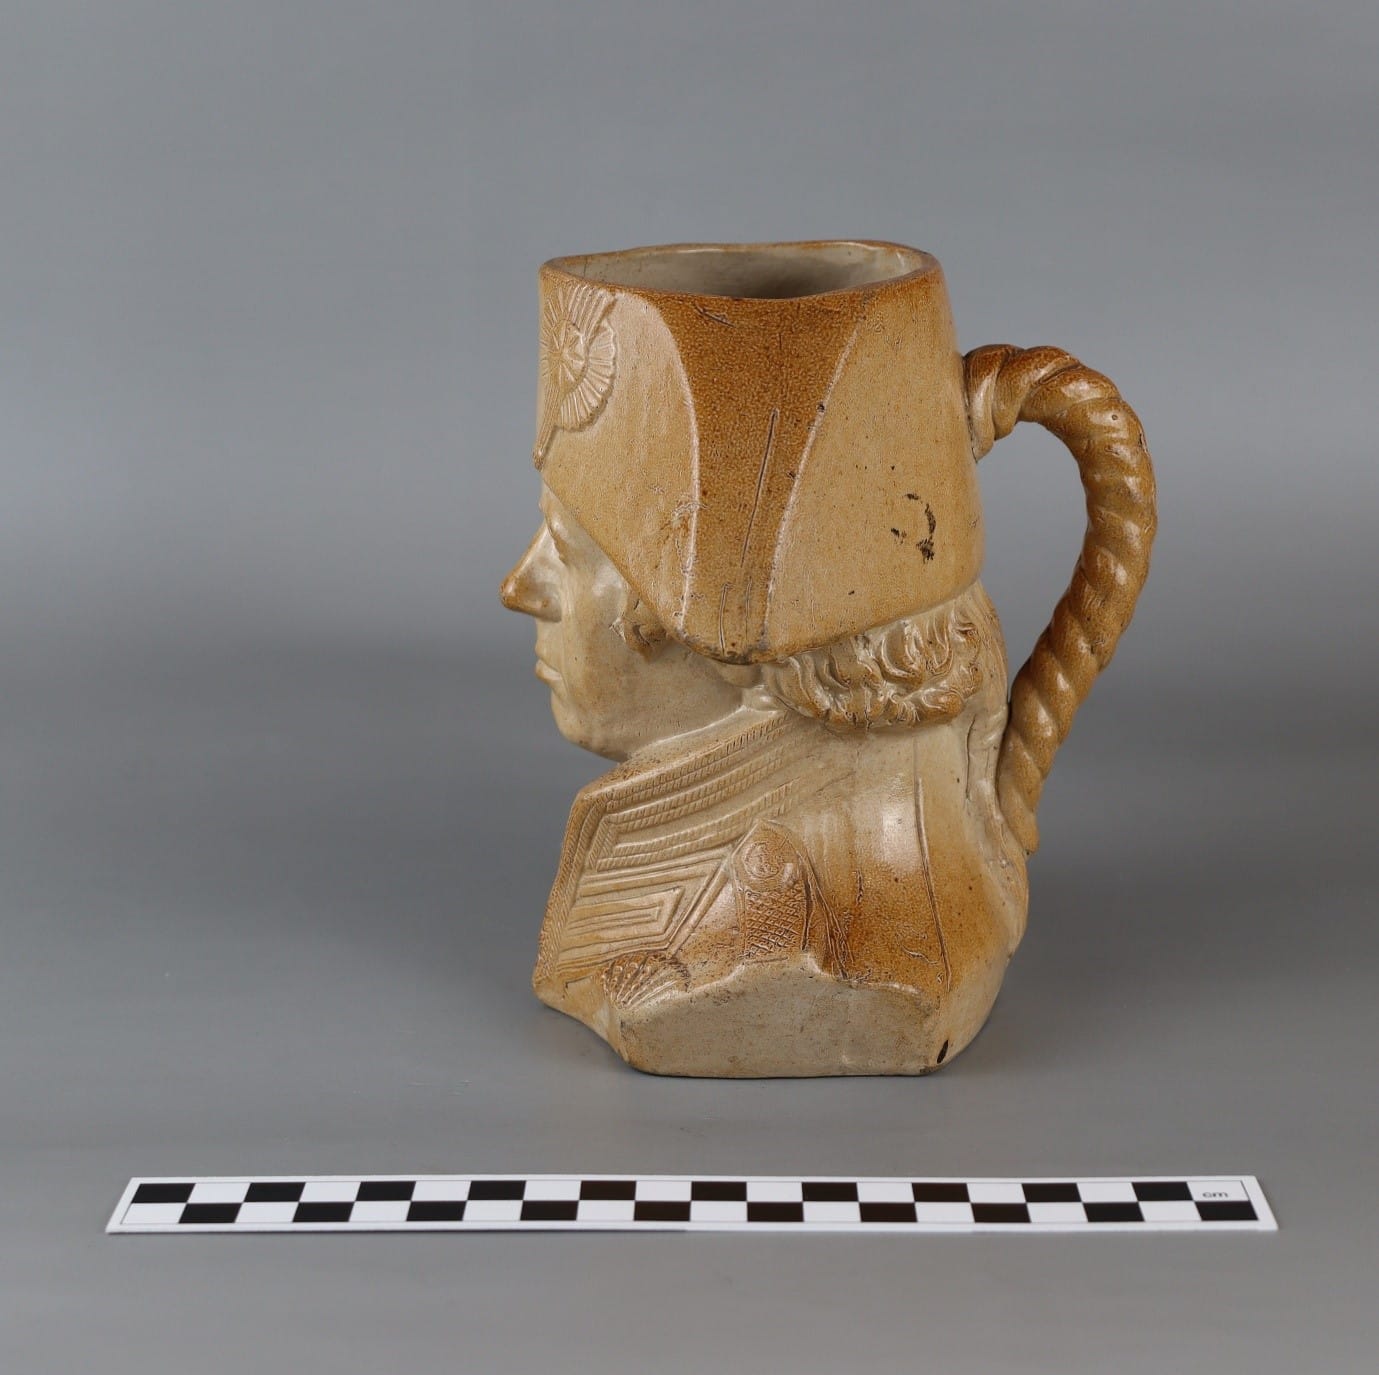 A ceramic mug with a head on it

Description automatically generated